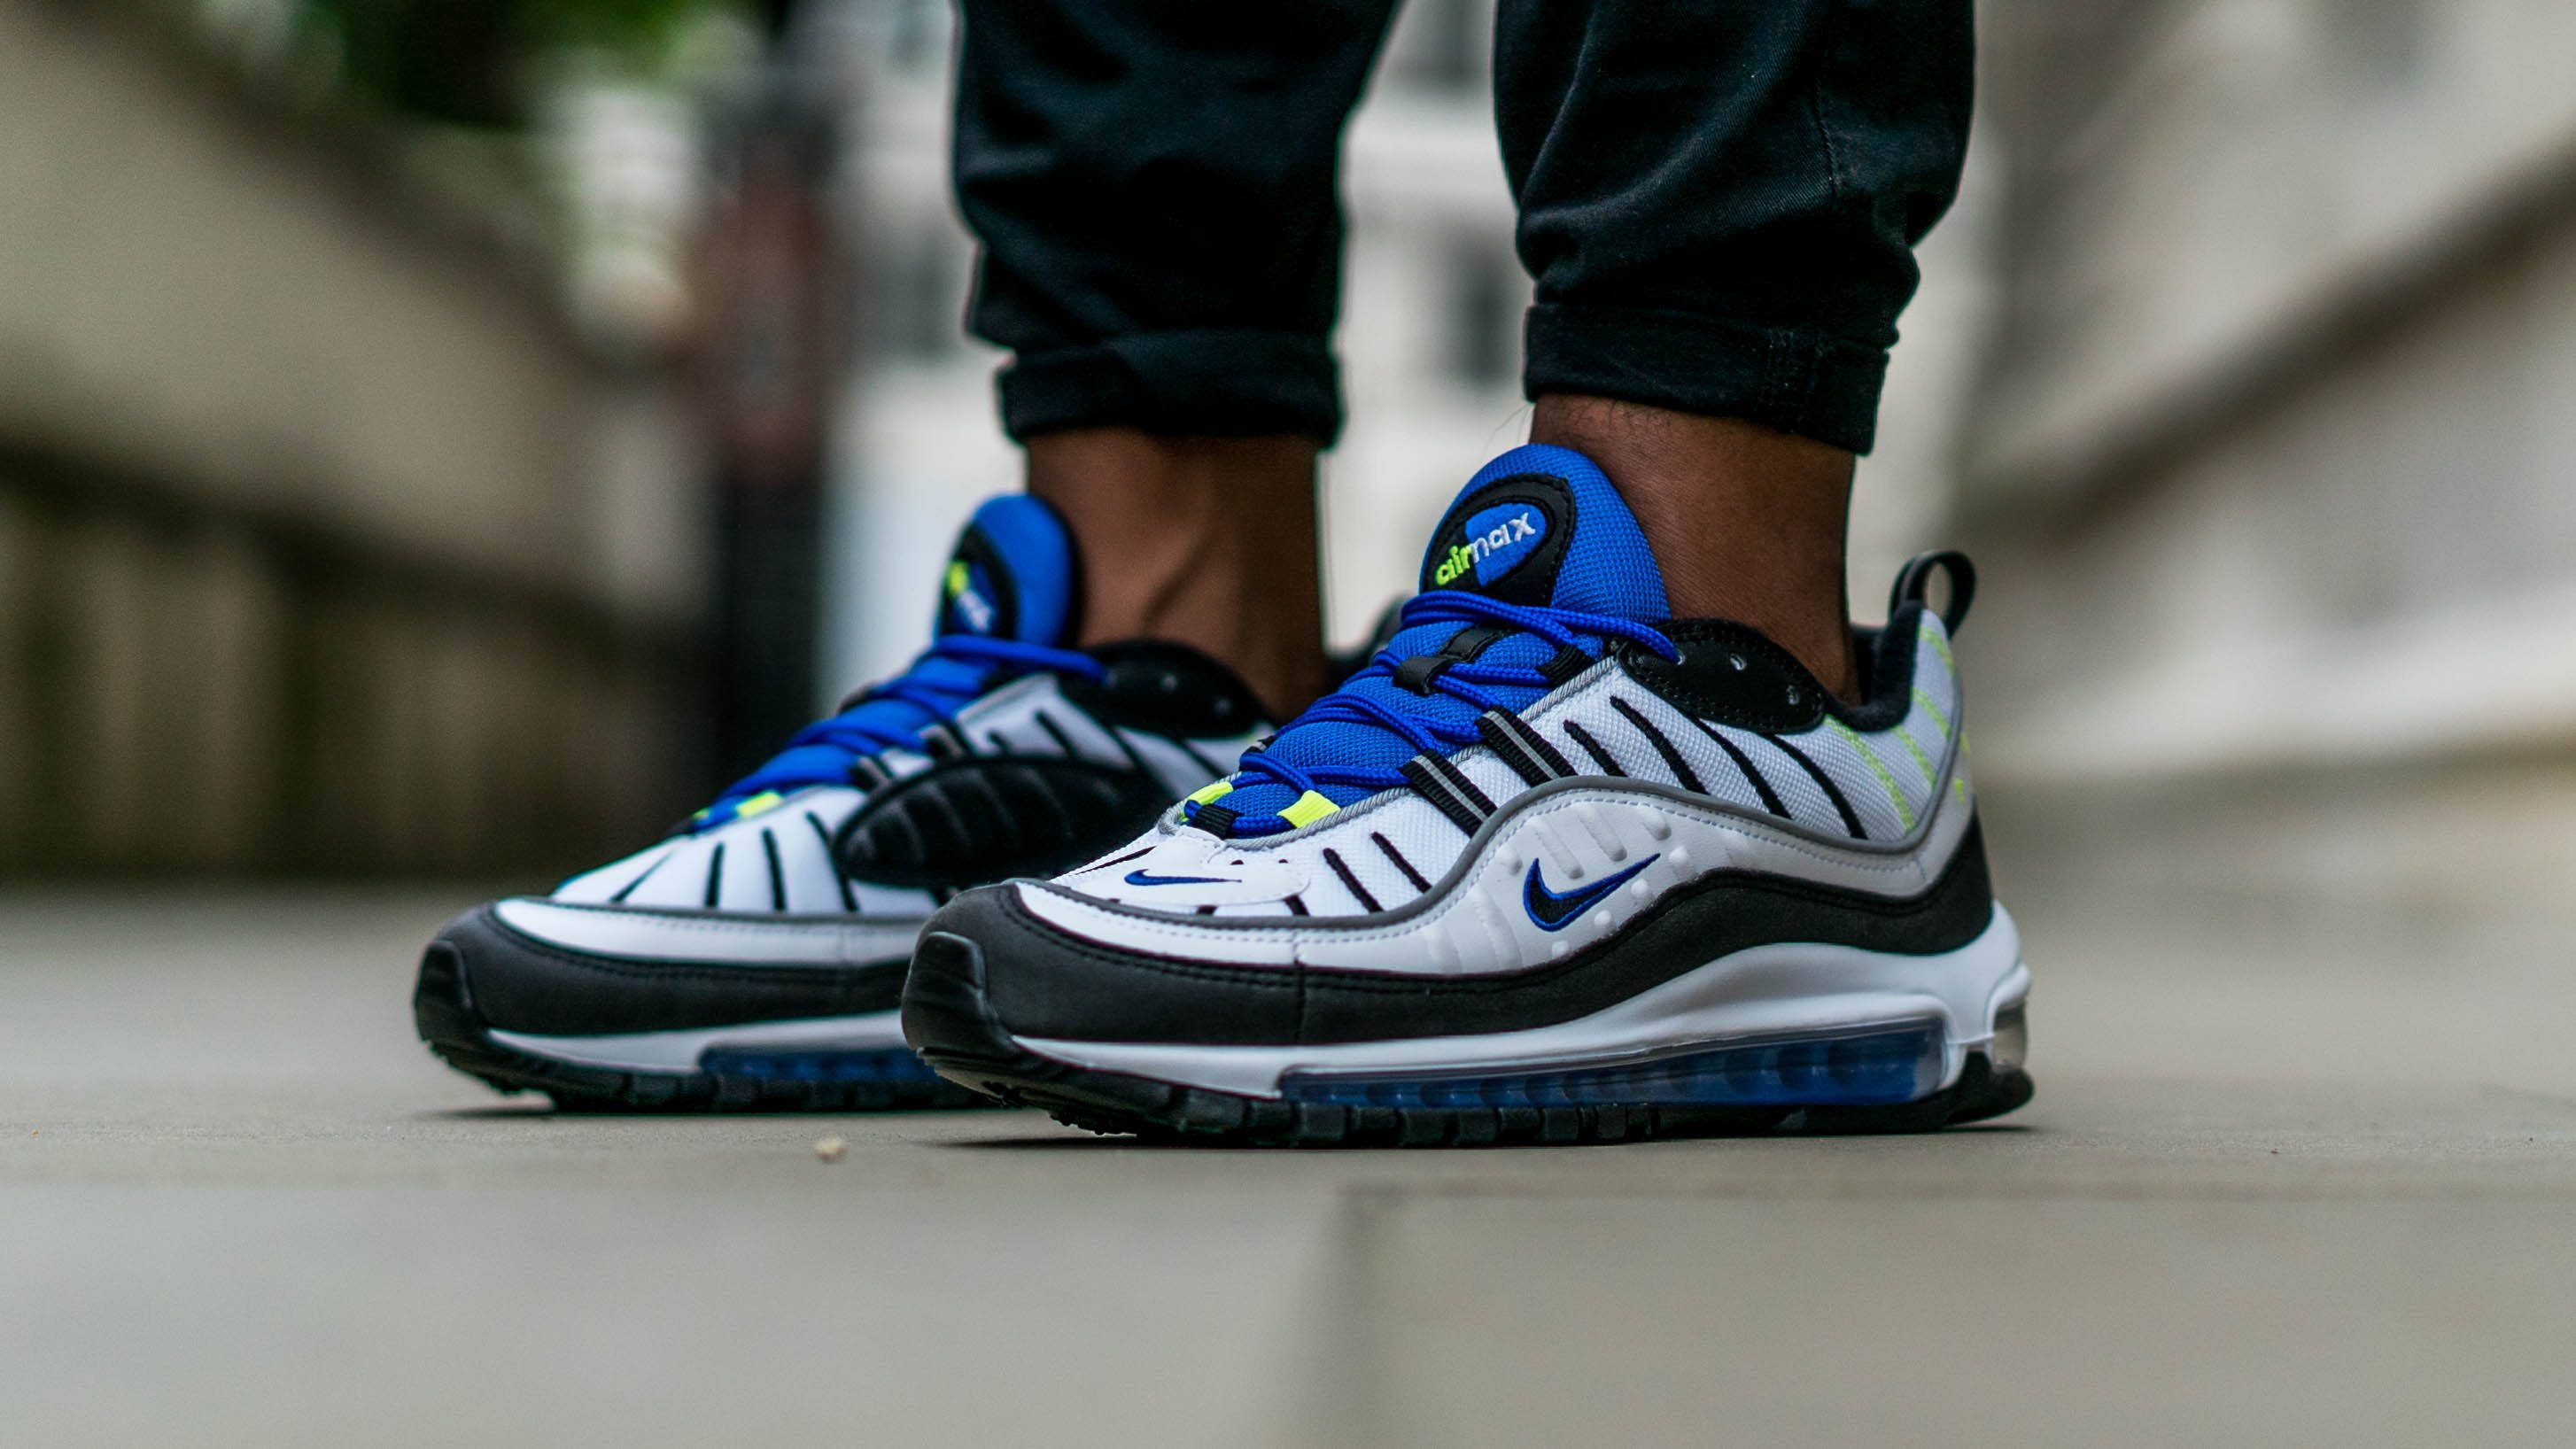 Nike Air Max 98 Sizing: How Do They Fit 